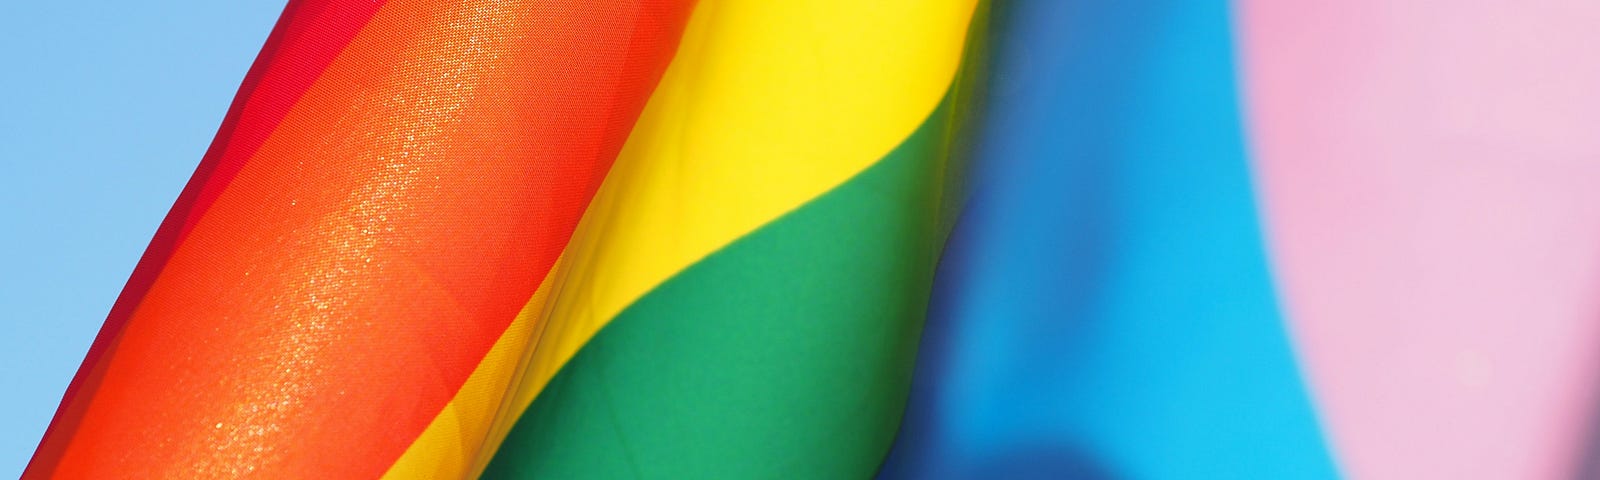 Close-up of the colorful rainbow stripes on a PRIDE flag, against a bright blue sky.